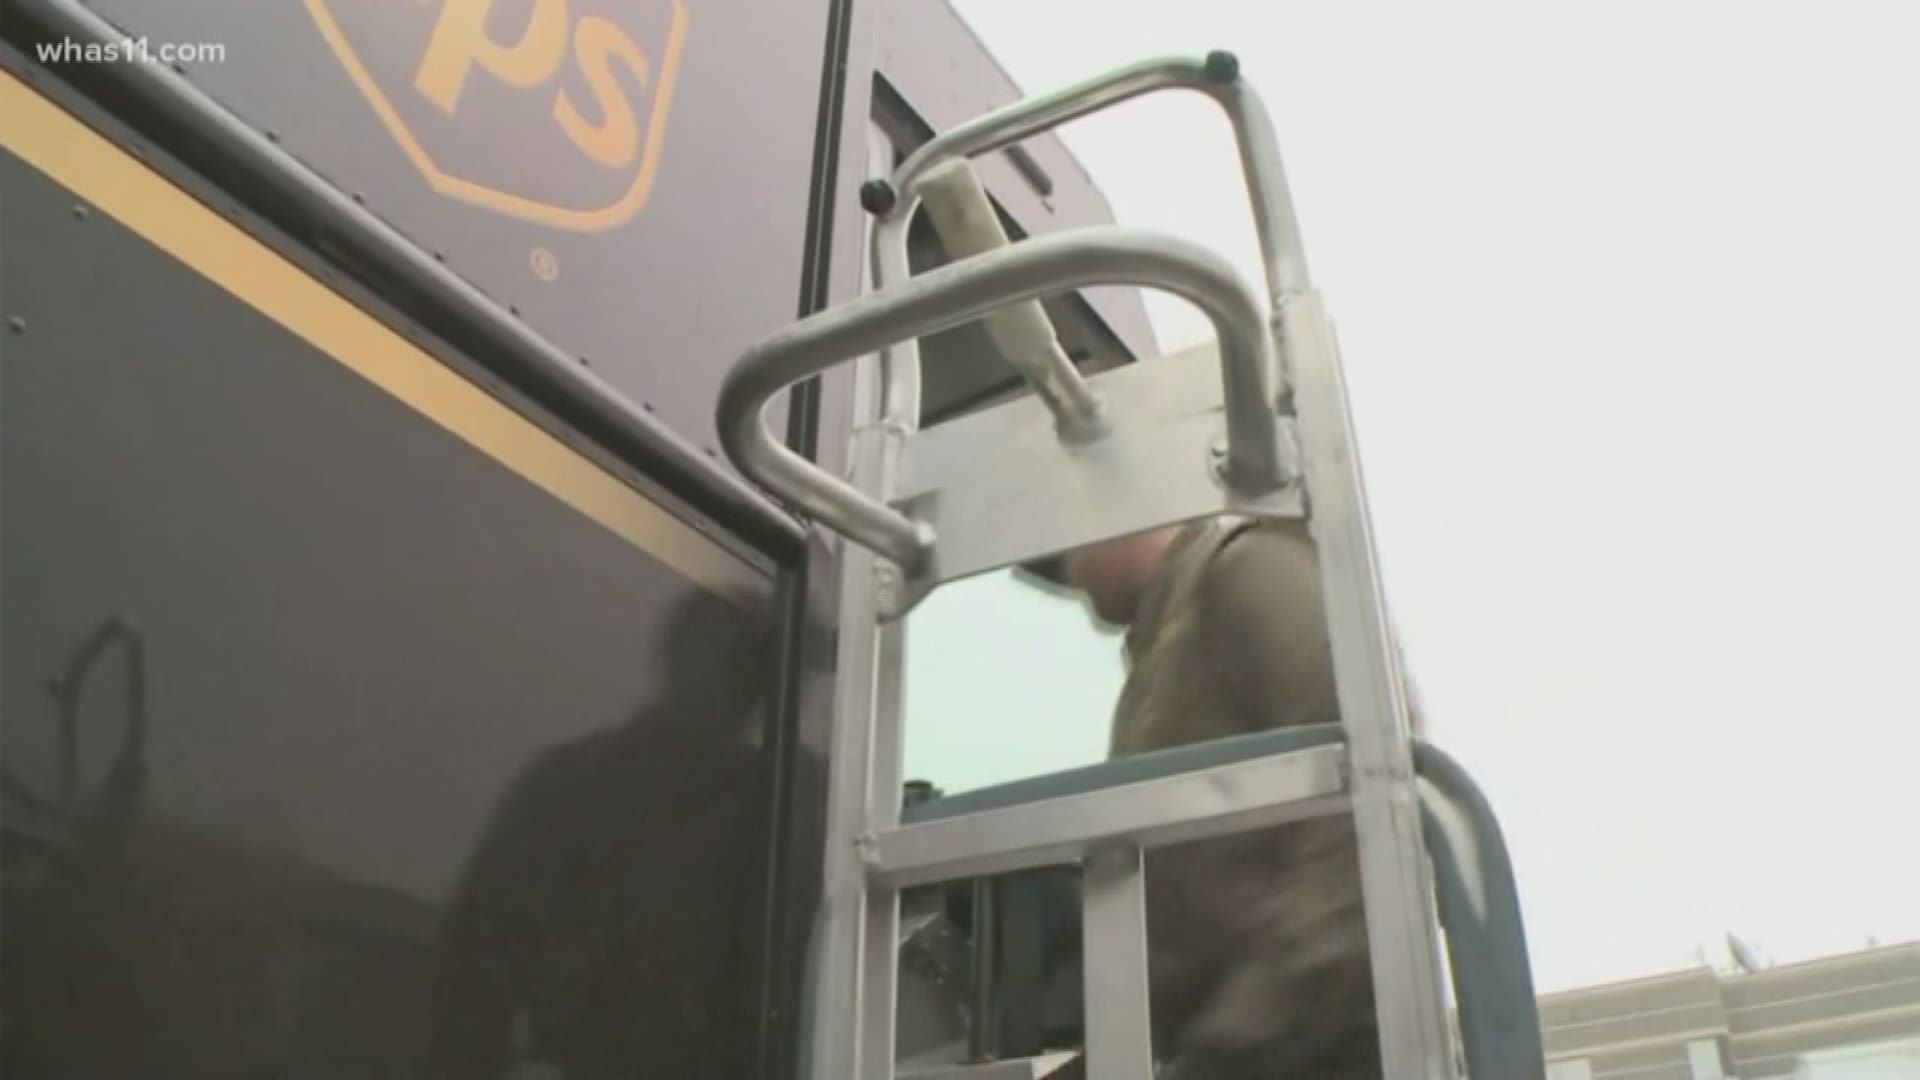 UPS is adding 450-thousand square feet of space in Louisville